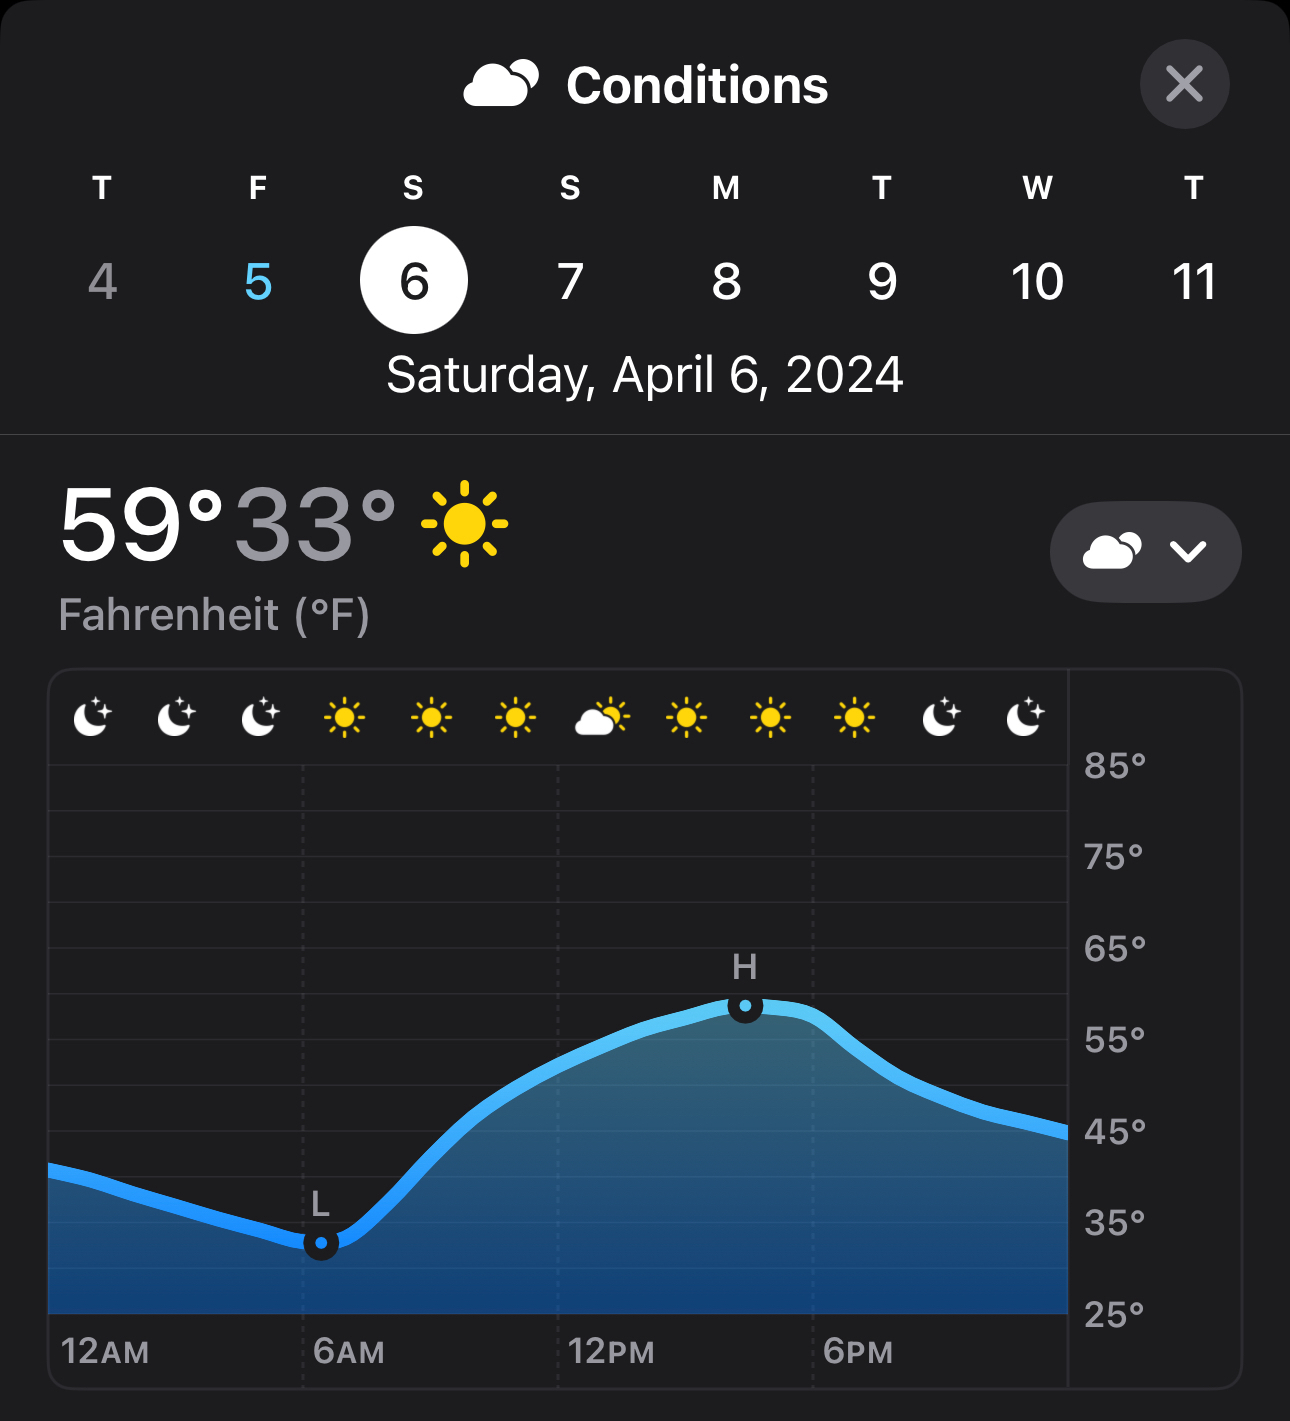 Weather forecast application interface showing conditions for Saturday, April 6, 2024, with a high of 59°F, a low of 33°F, clear skies, and hourly temperature progression graph.